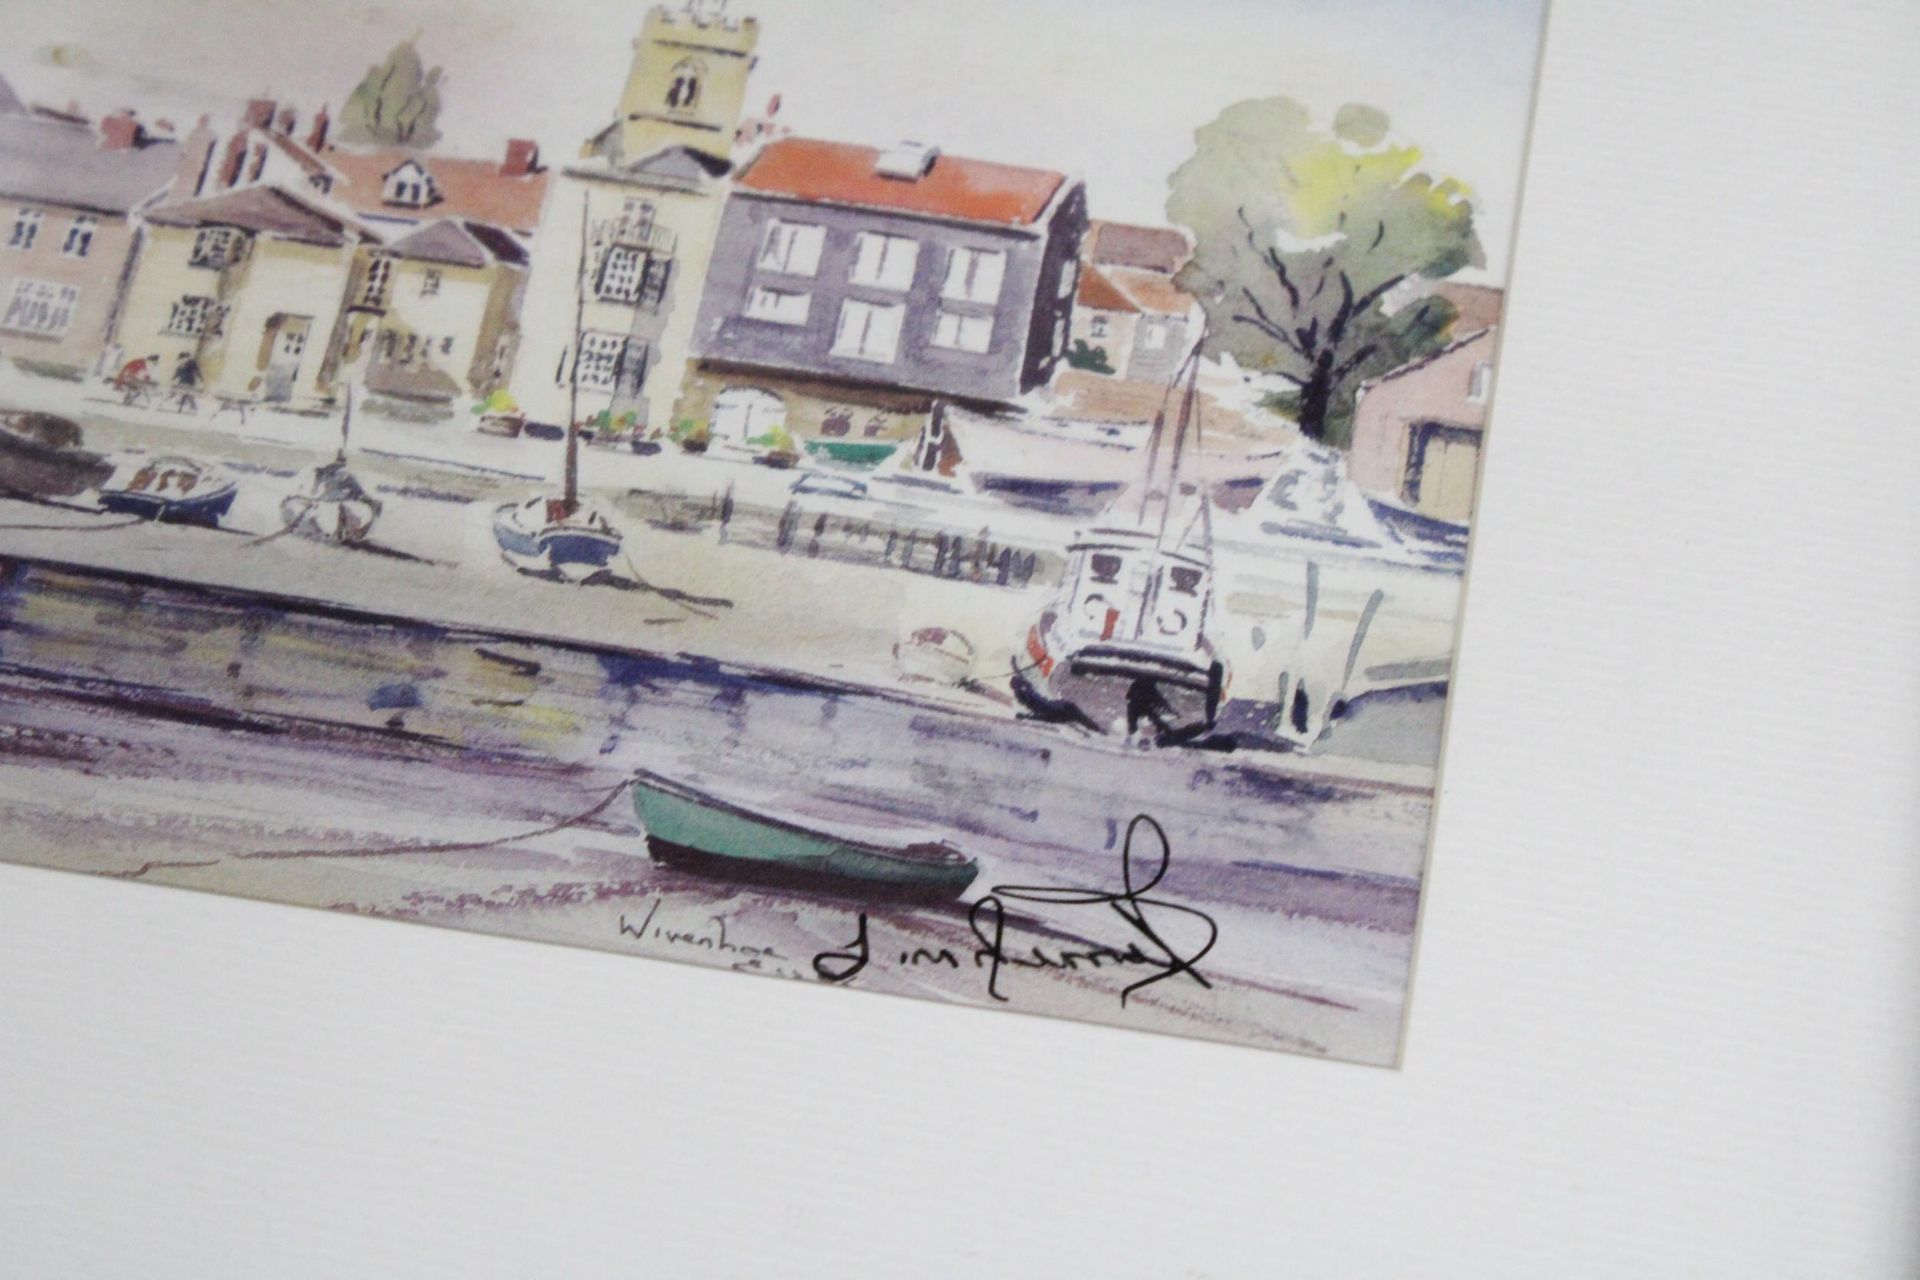 TWO FRAMED WATERCOLOURS ONE OF A BOATING SCENE AND THE OTHER A TOWN SCENE BOTH WITH SIGNATURES - Image 5 of 5